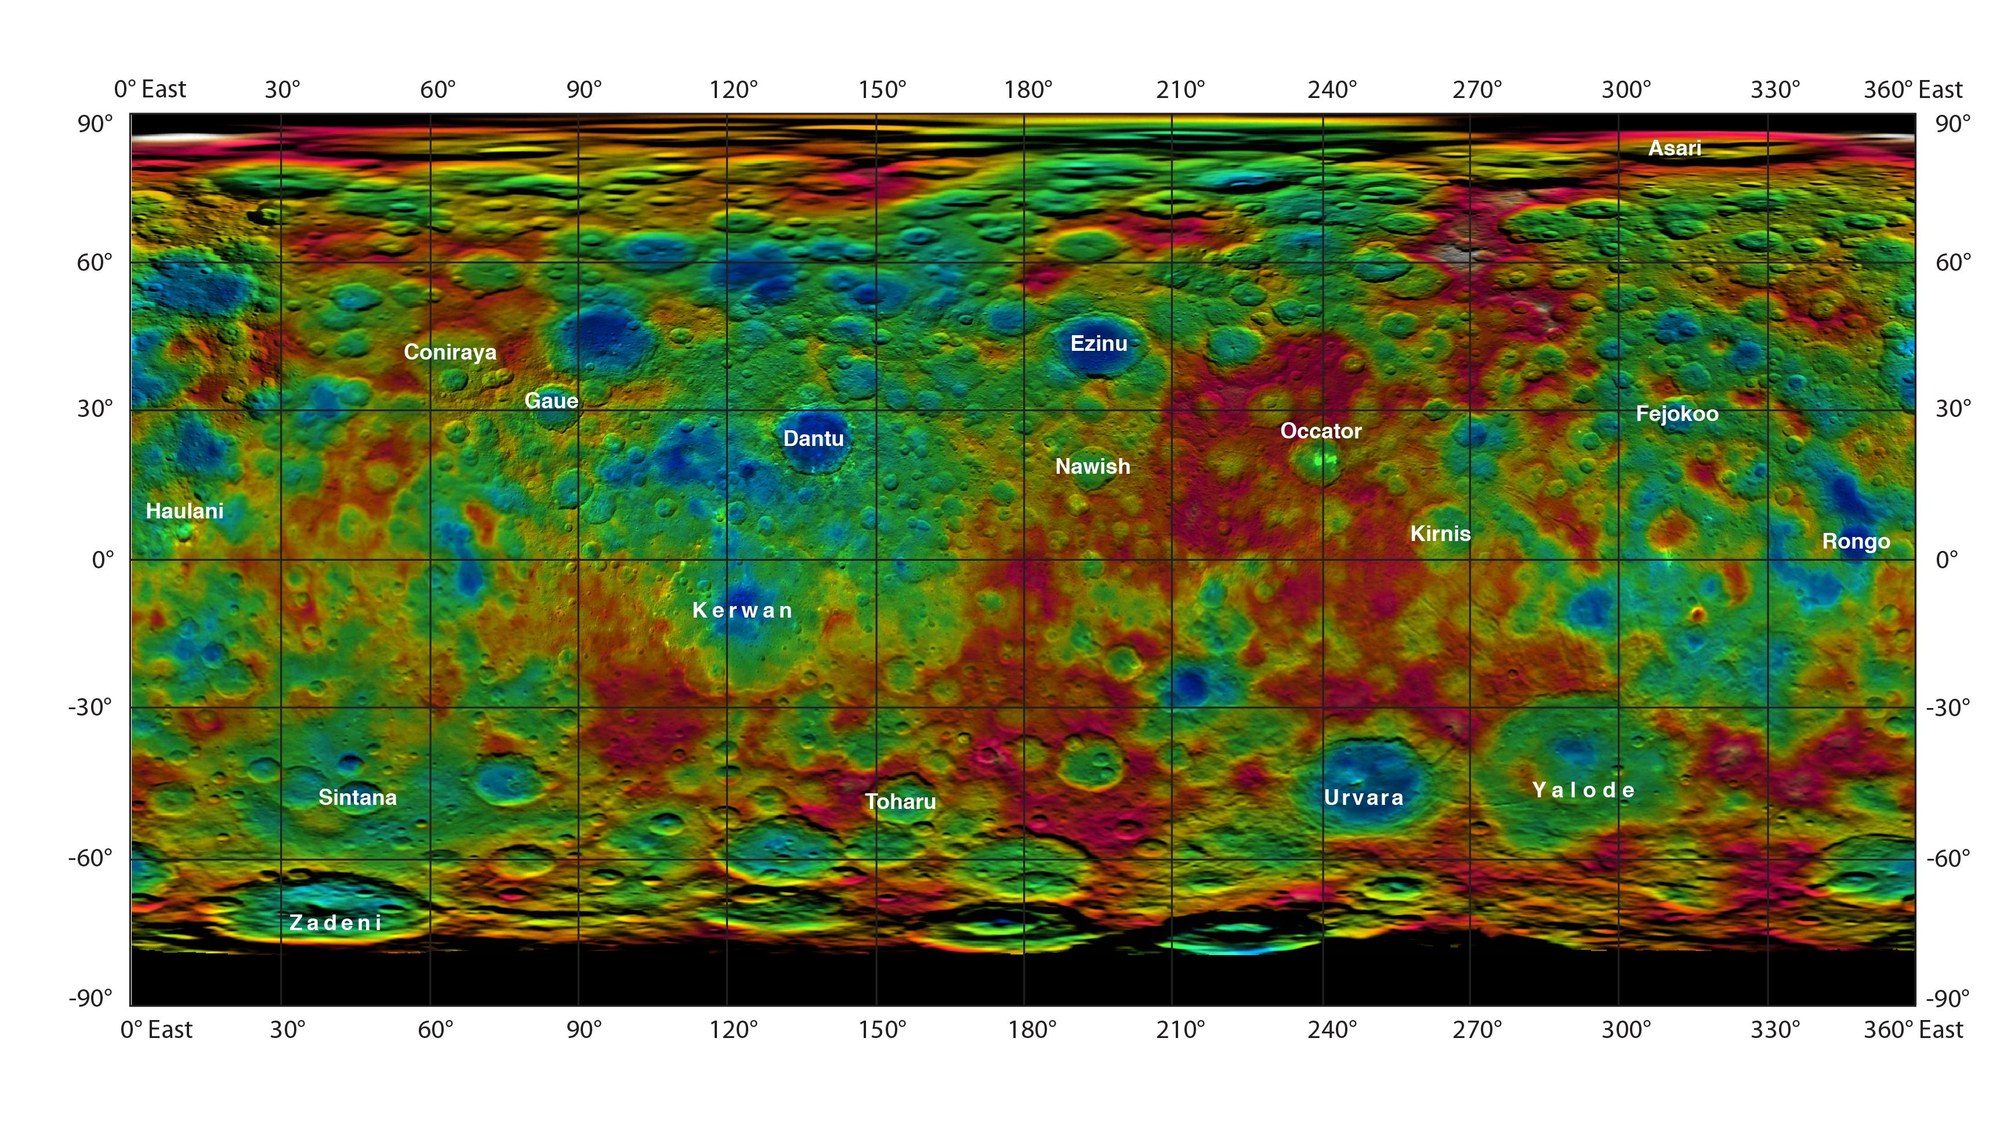 Crater on Ceres: From Asari to Zadeni